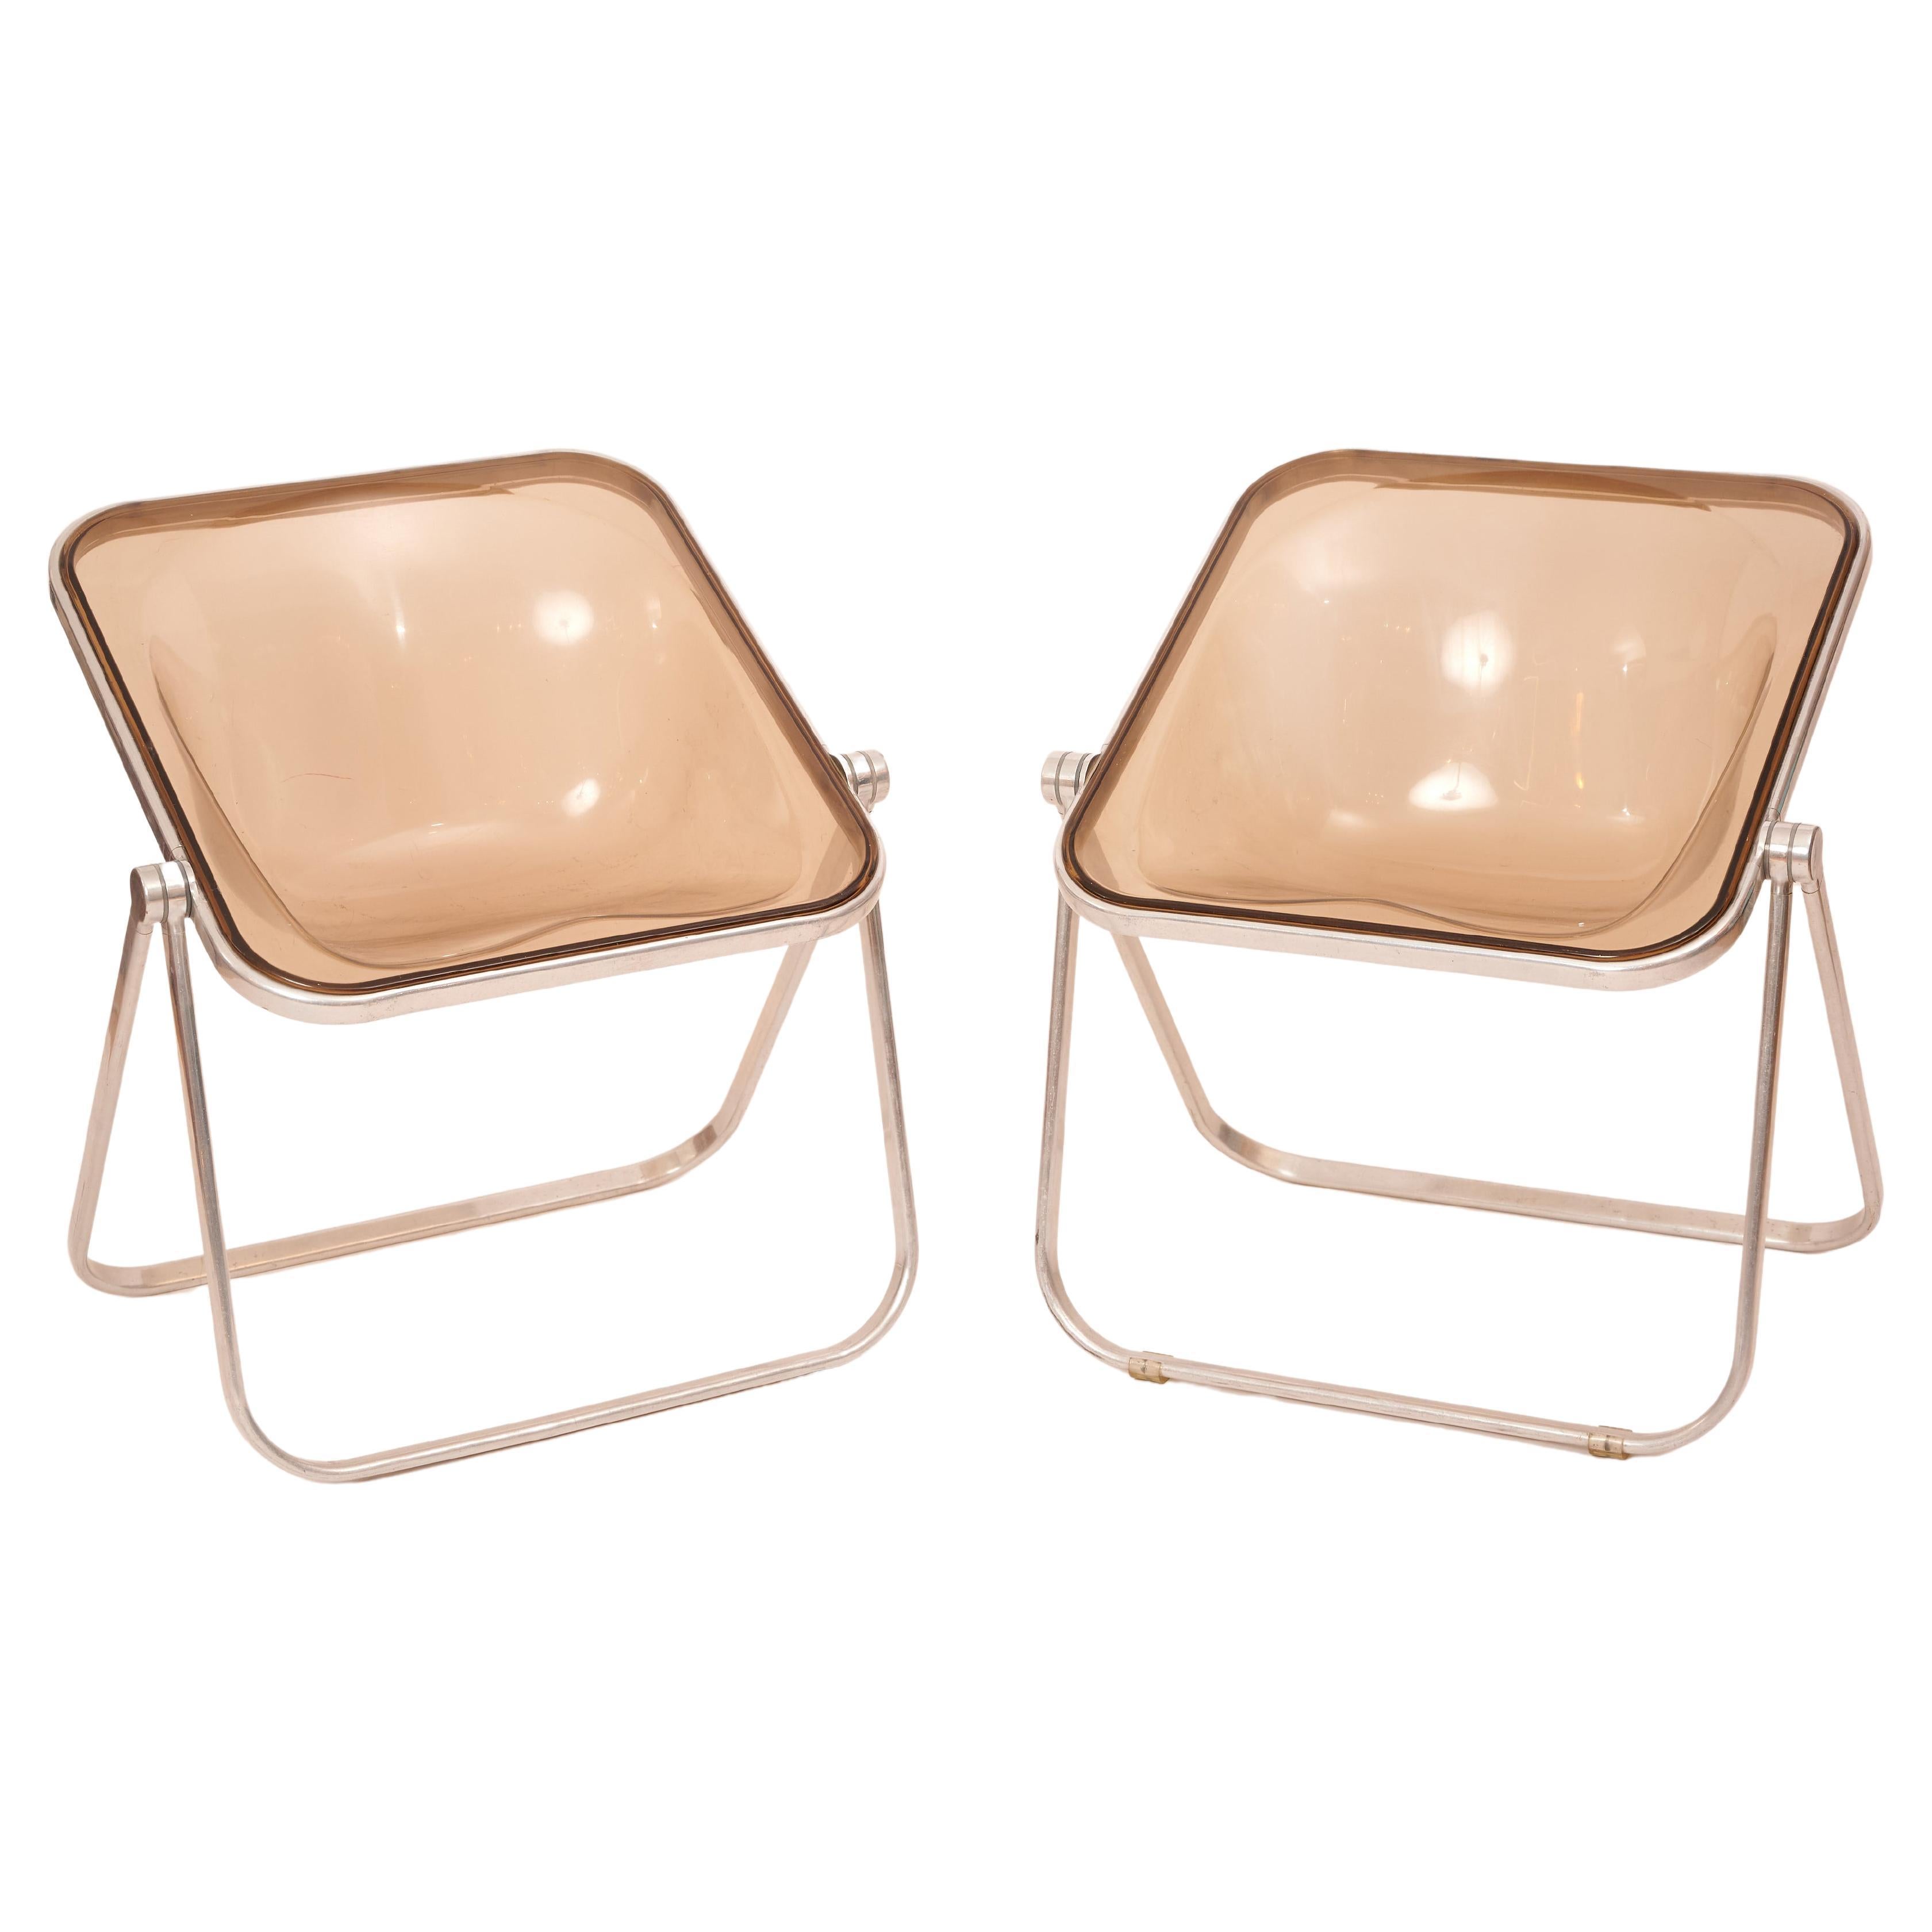 Plona Chairs in Beige Smoked Lucite